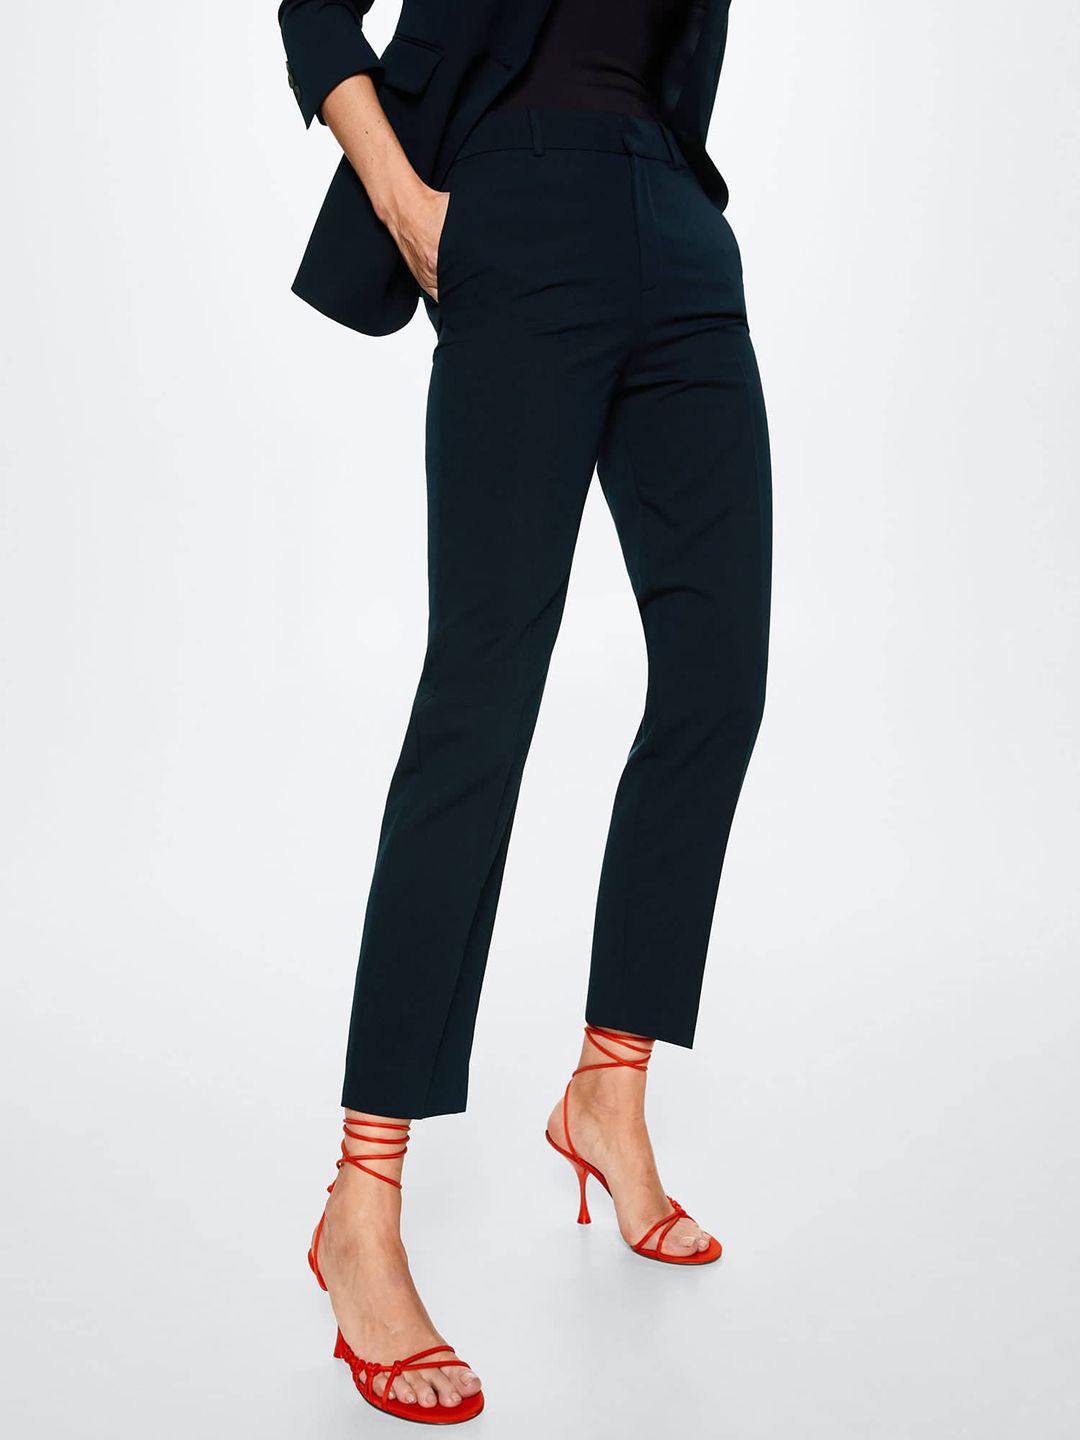 MANGO Women Navy Blue Solid Trousers Price in India